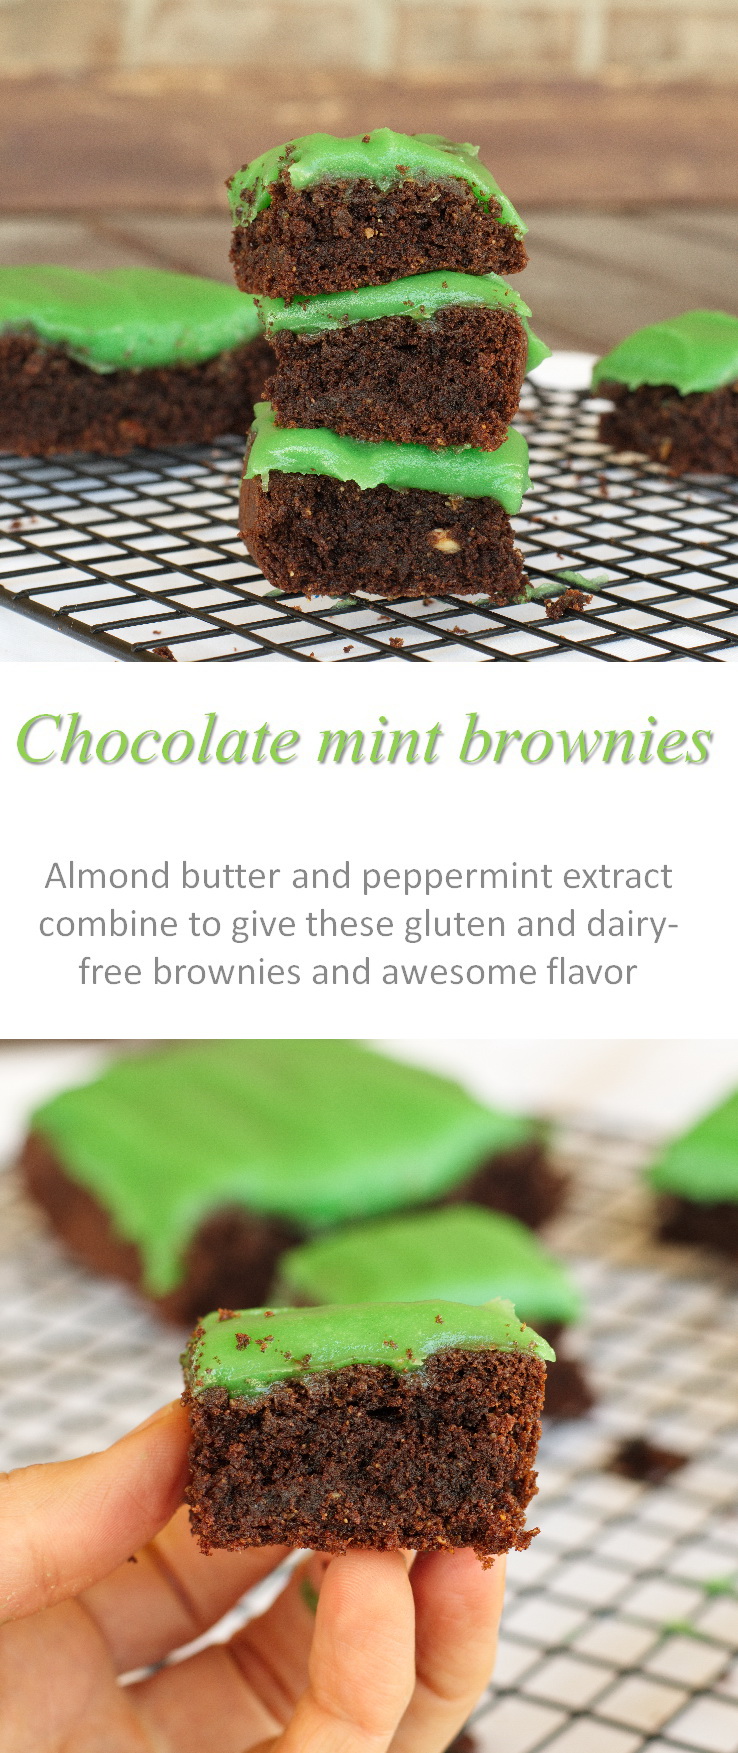 Brownies that are healthy with a minty-flavor - grain-free, gluten-free and refined-sugar-free. #brownies #cookathome #paleo #glutenfree #dairyfree